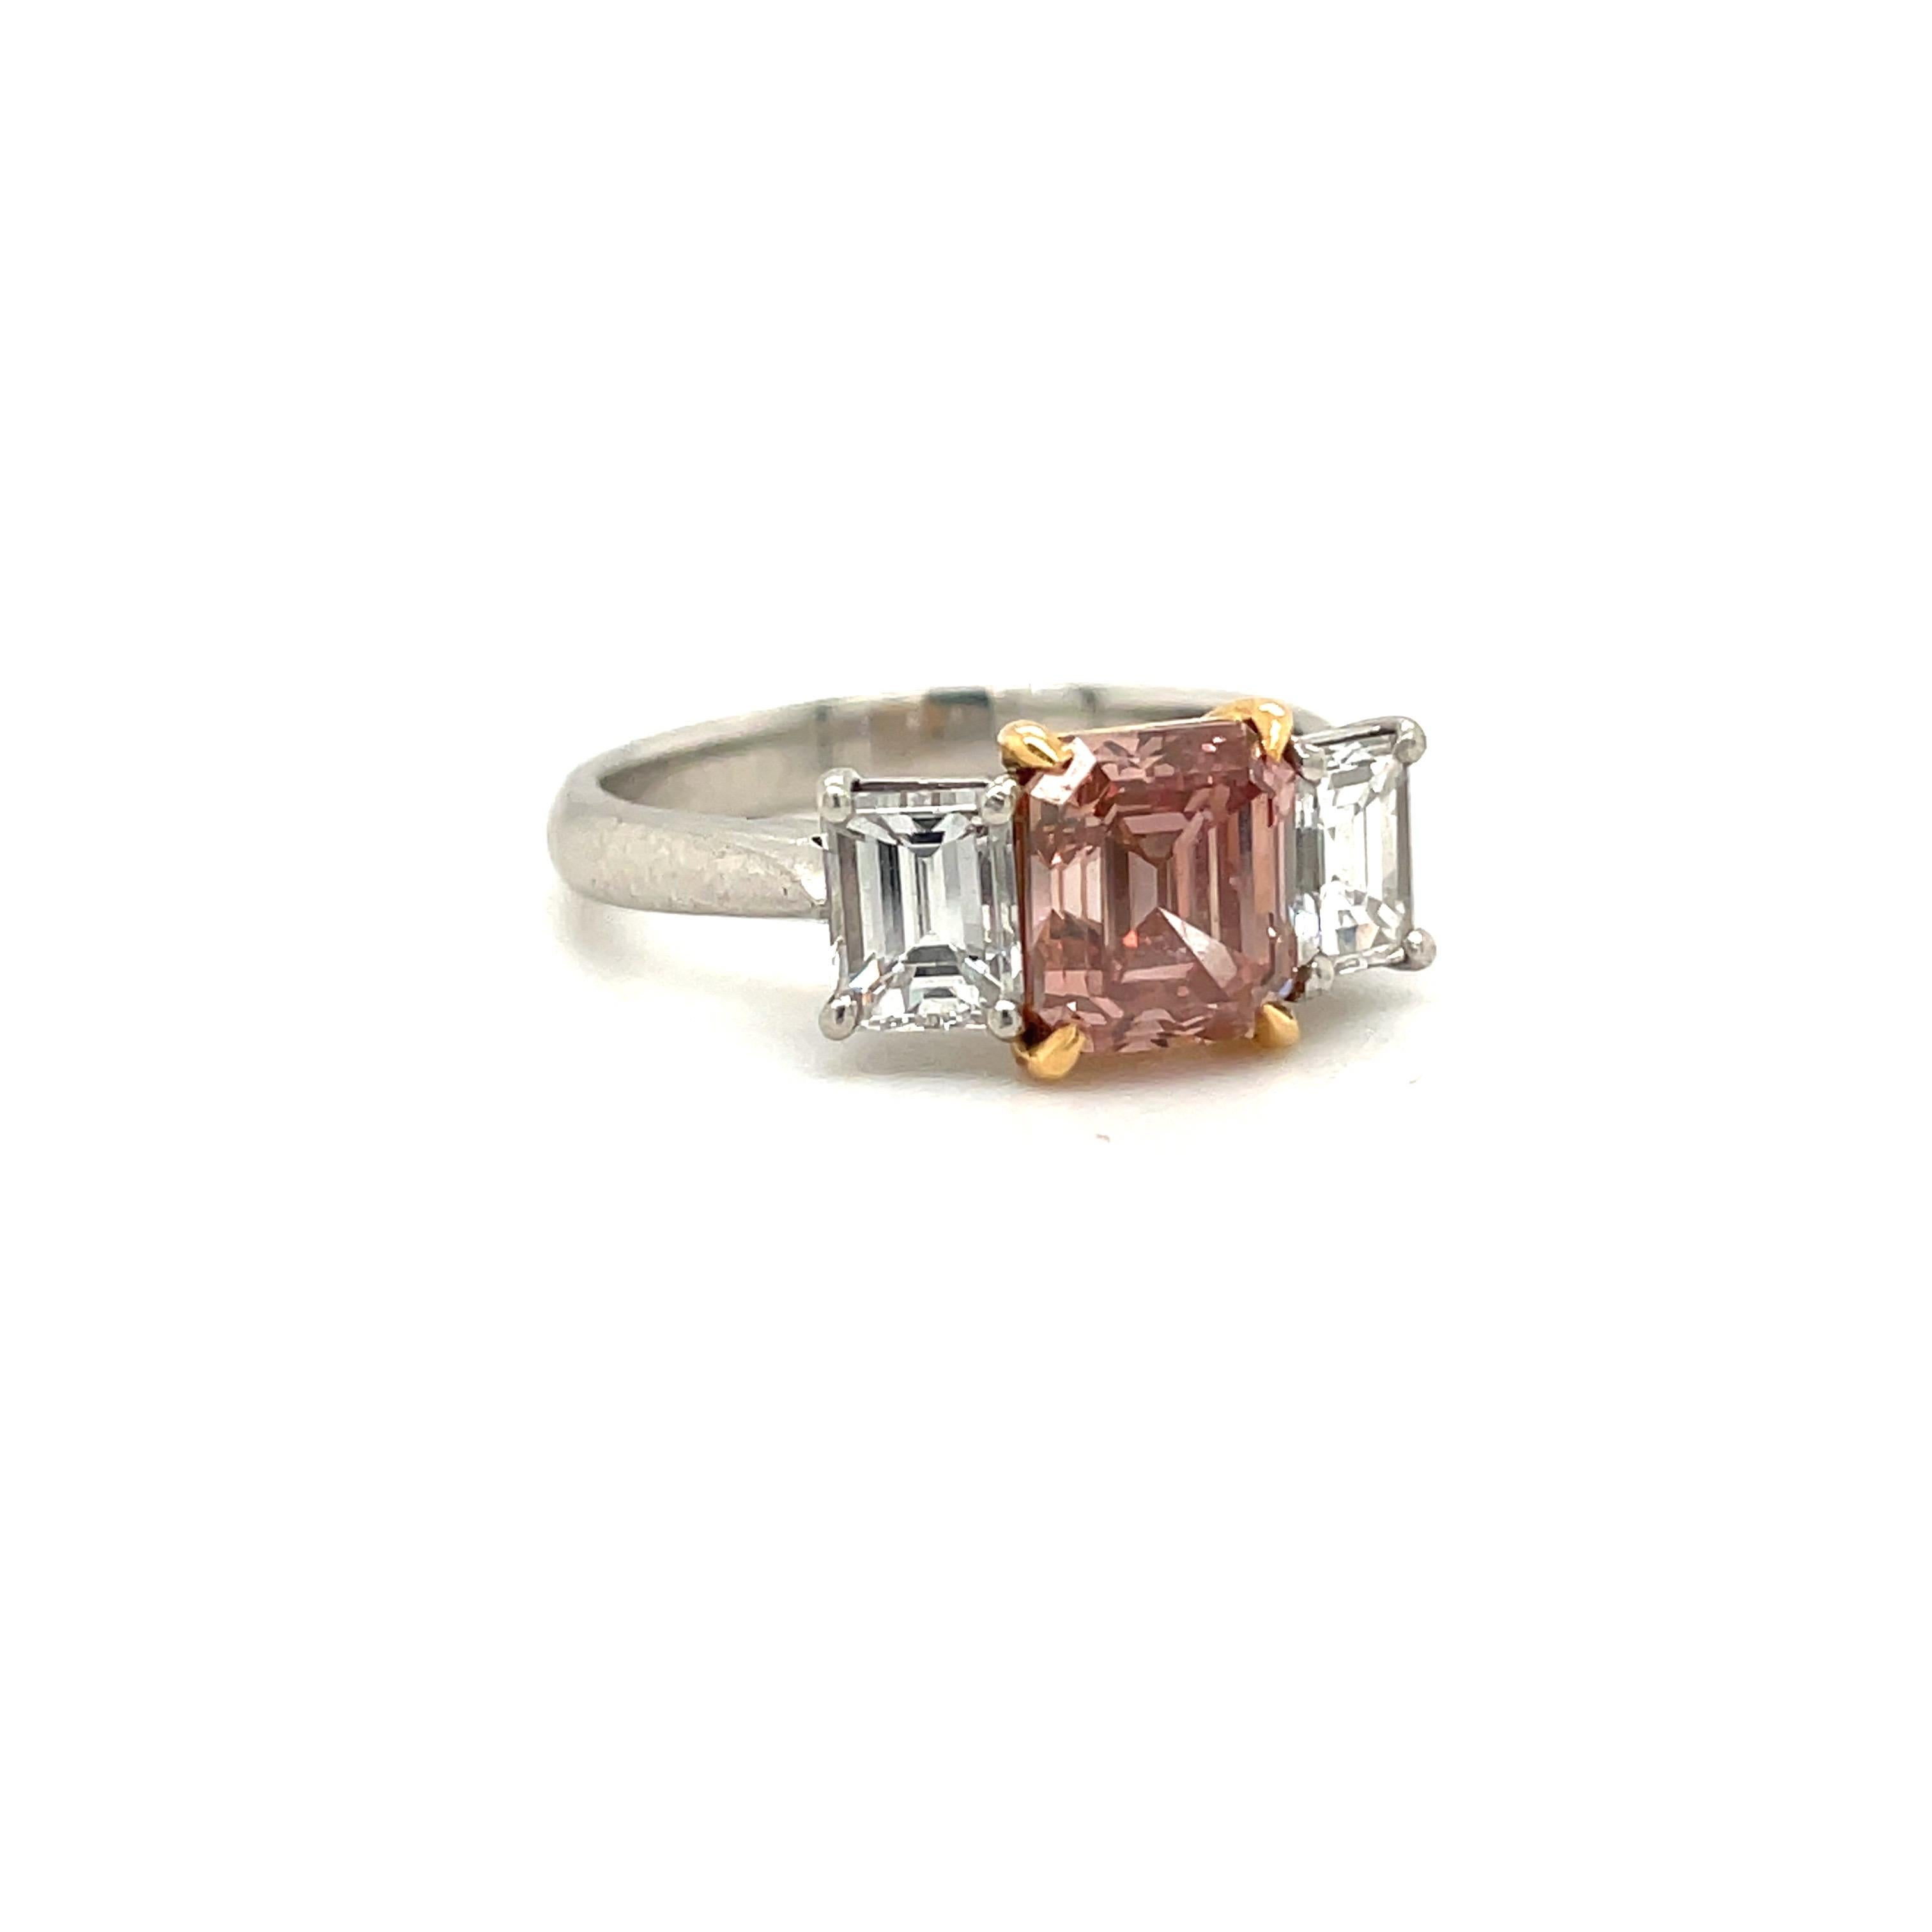 Natural, GIA certified fancy brownish-orange-pink emerald-cut diamond mounted with emerald-cut white diamond side stones; in a platinum and 18-karat rose gold setting.
Truly one of a kind, this rare fancy pink diamond is made even more special due